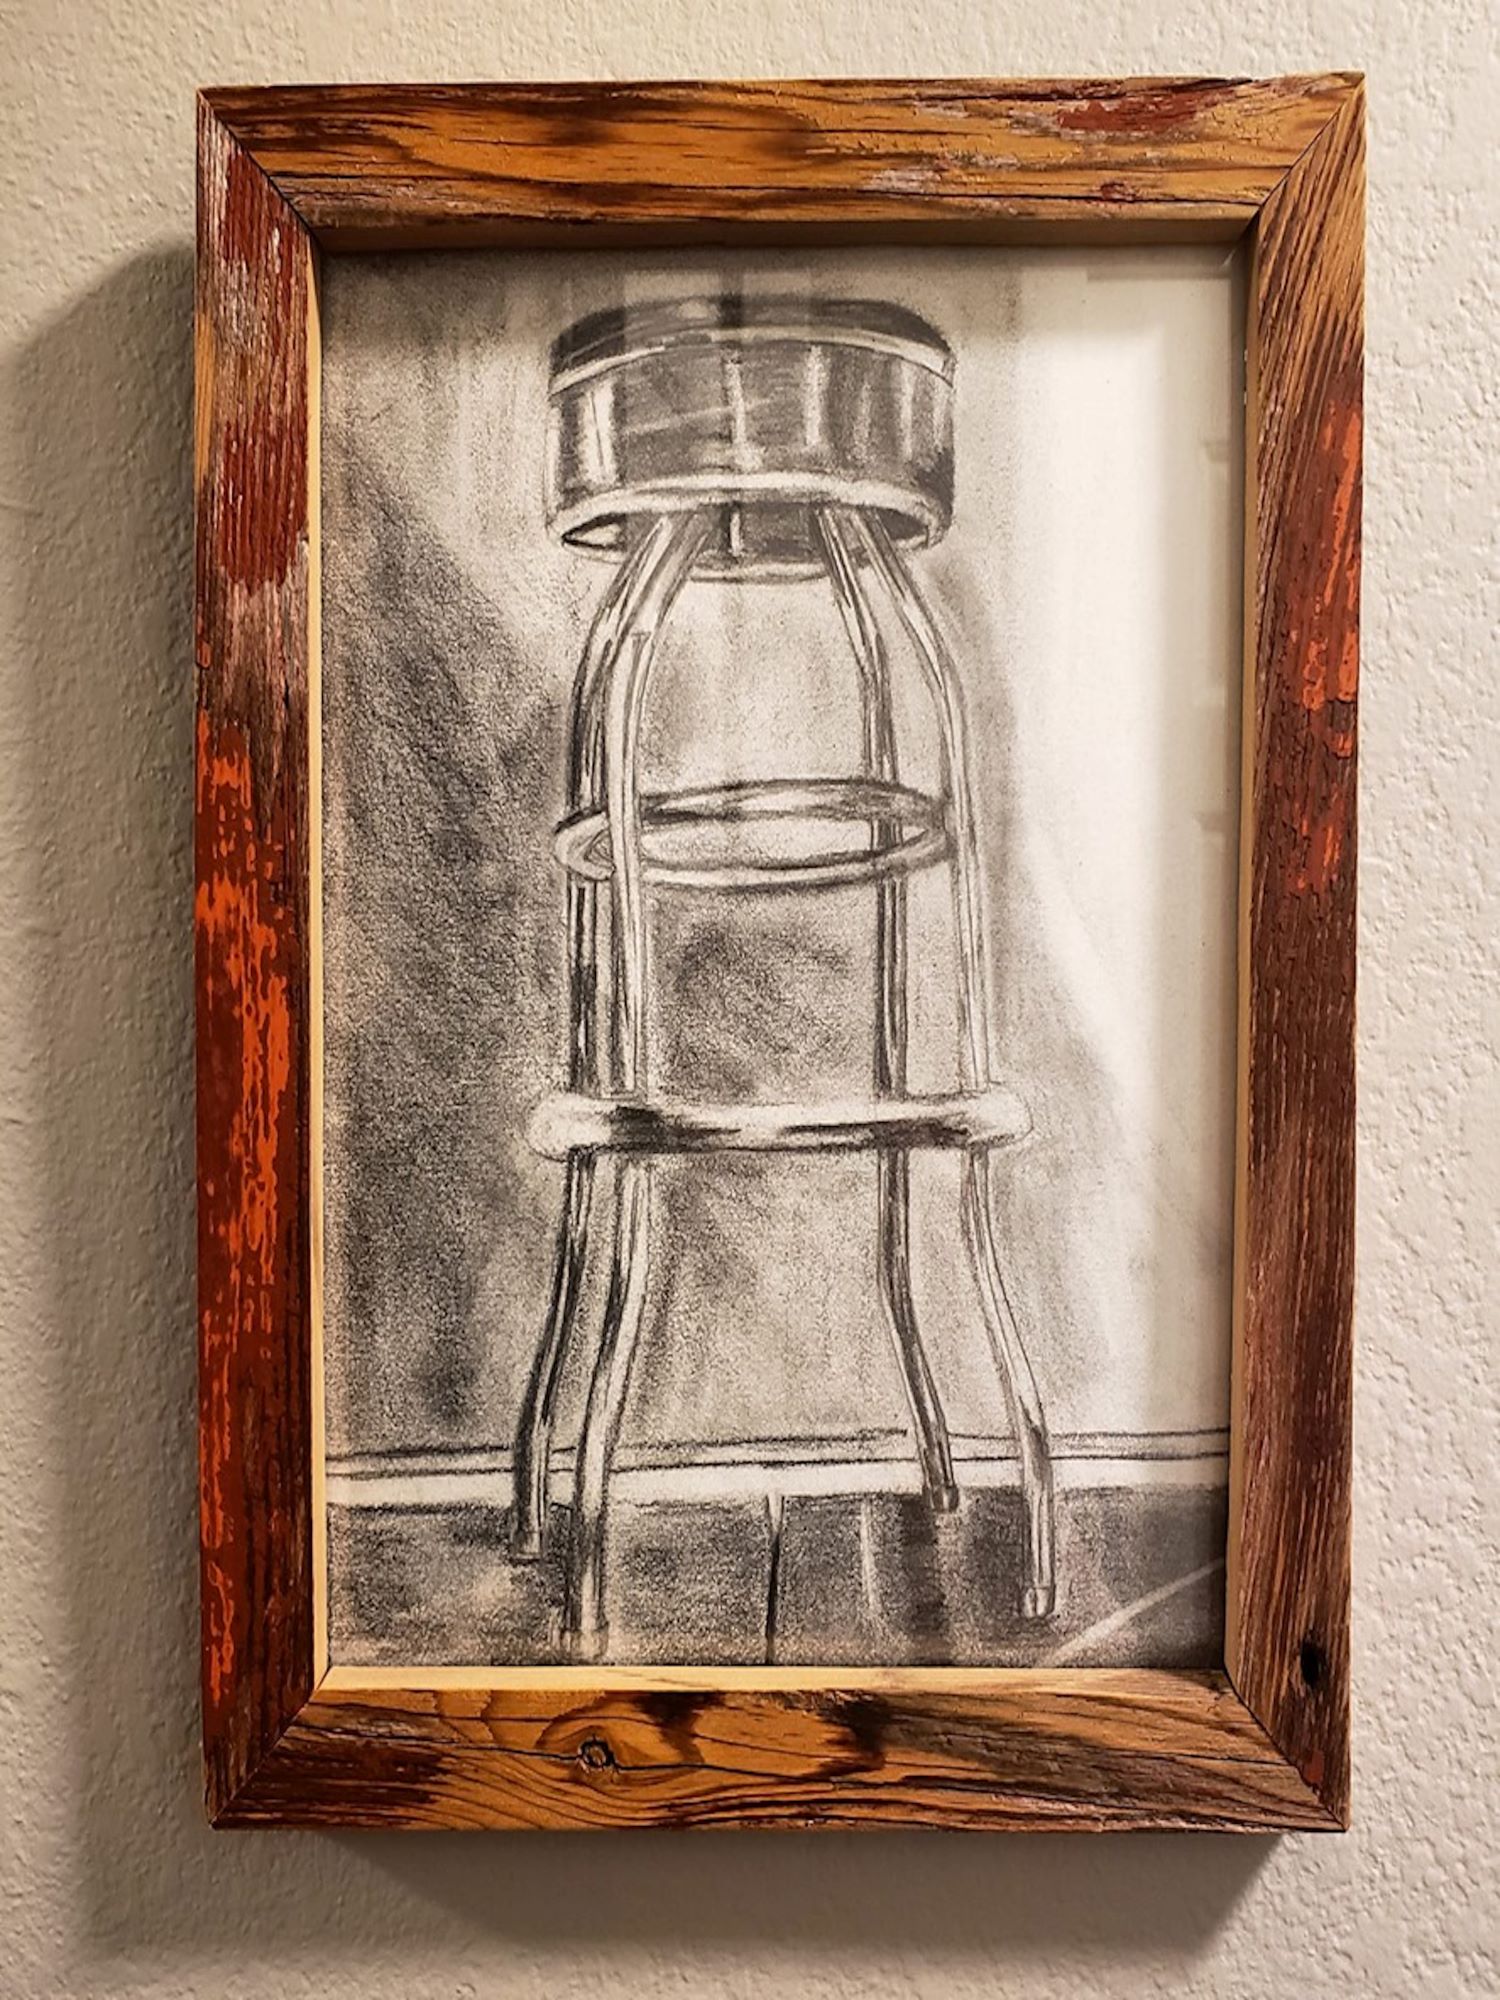 Drawing of a stool in a reclaimed barnwood frame